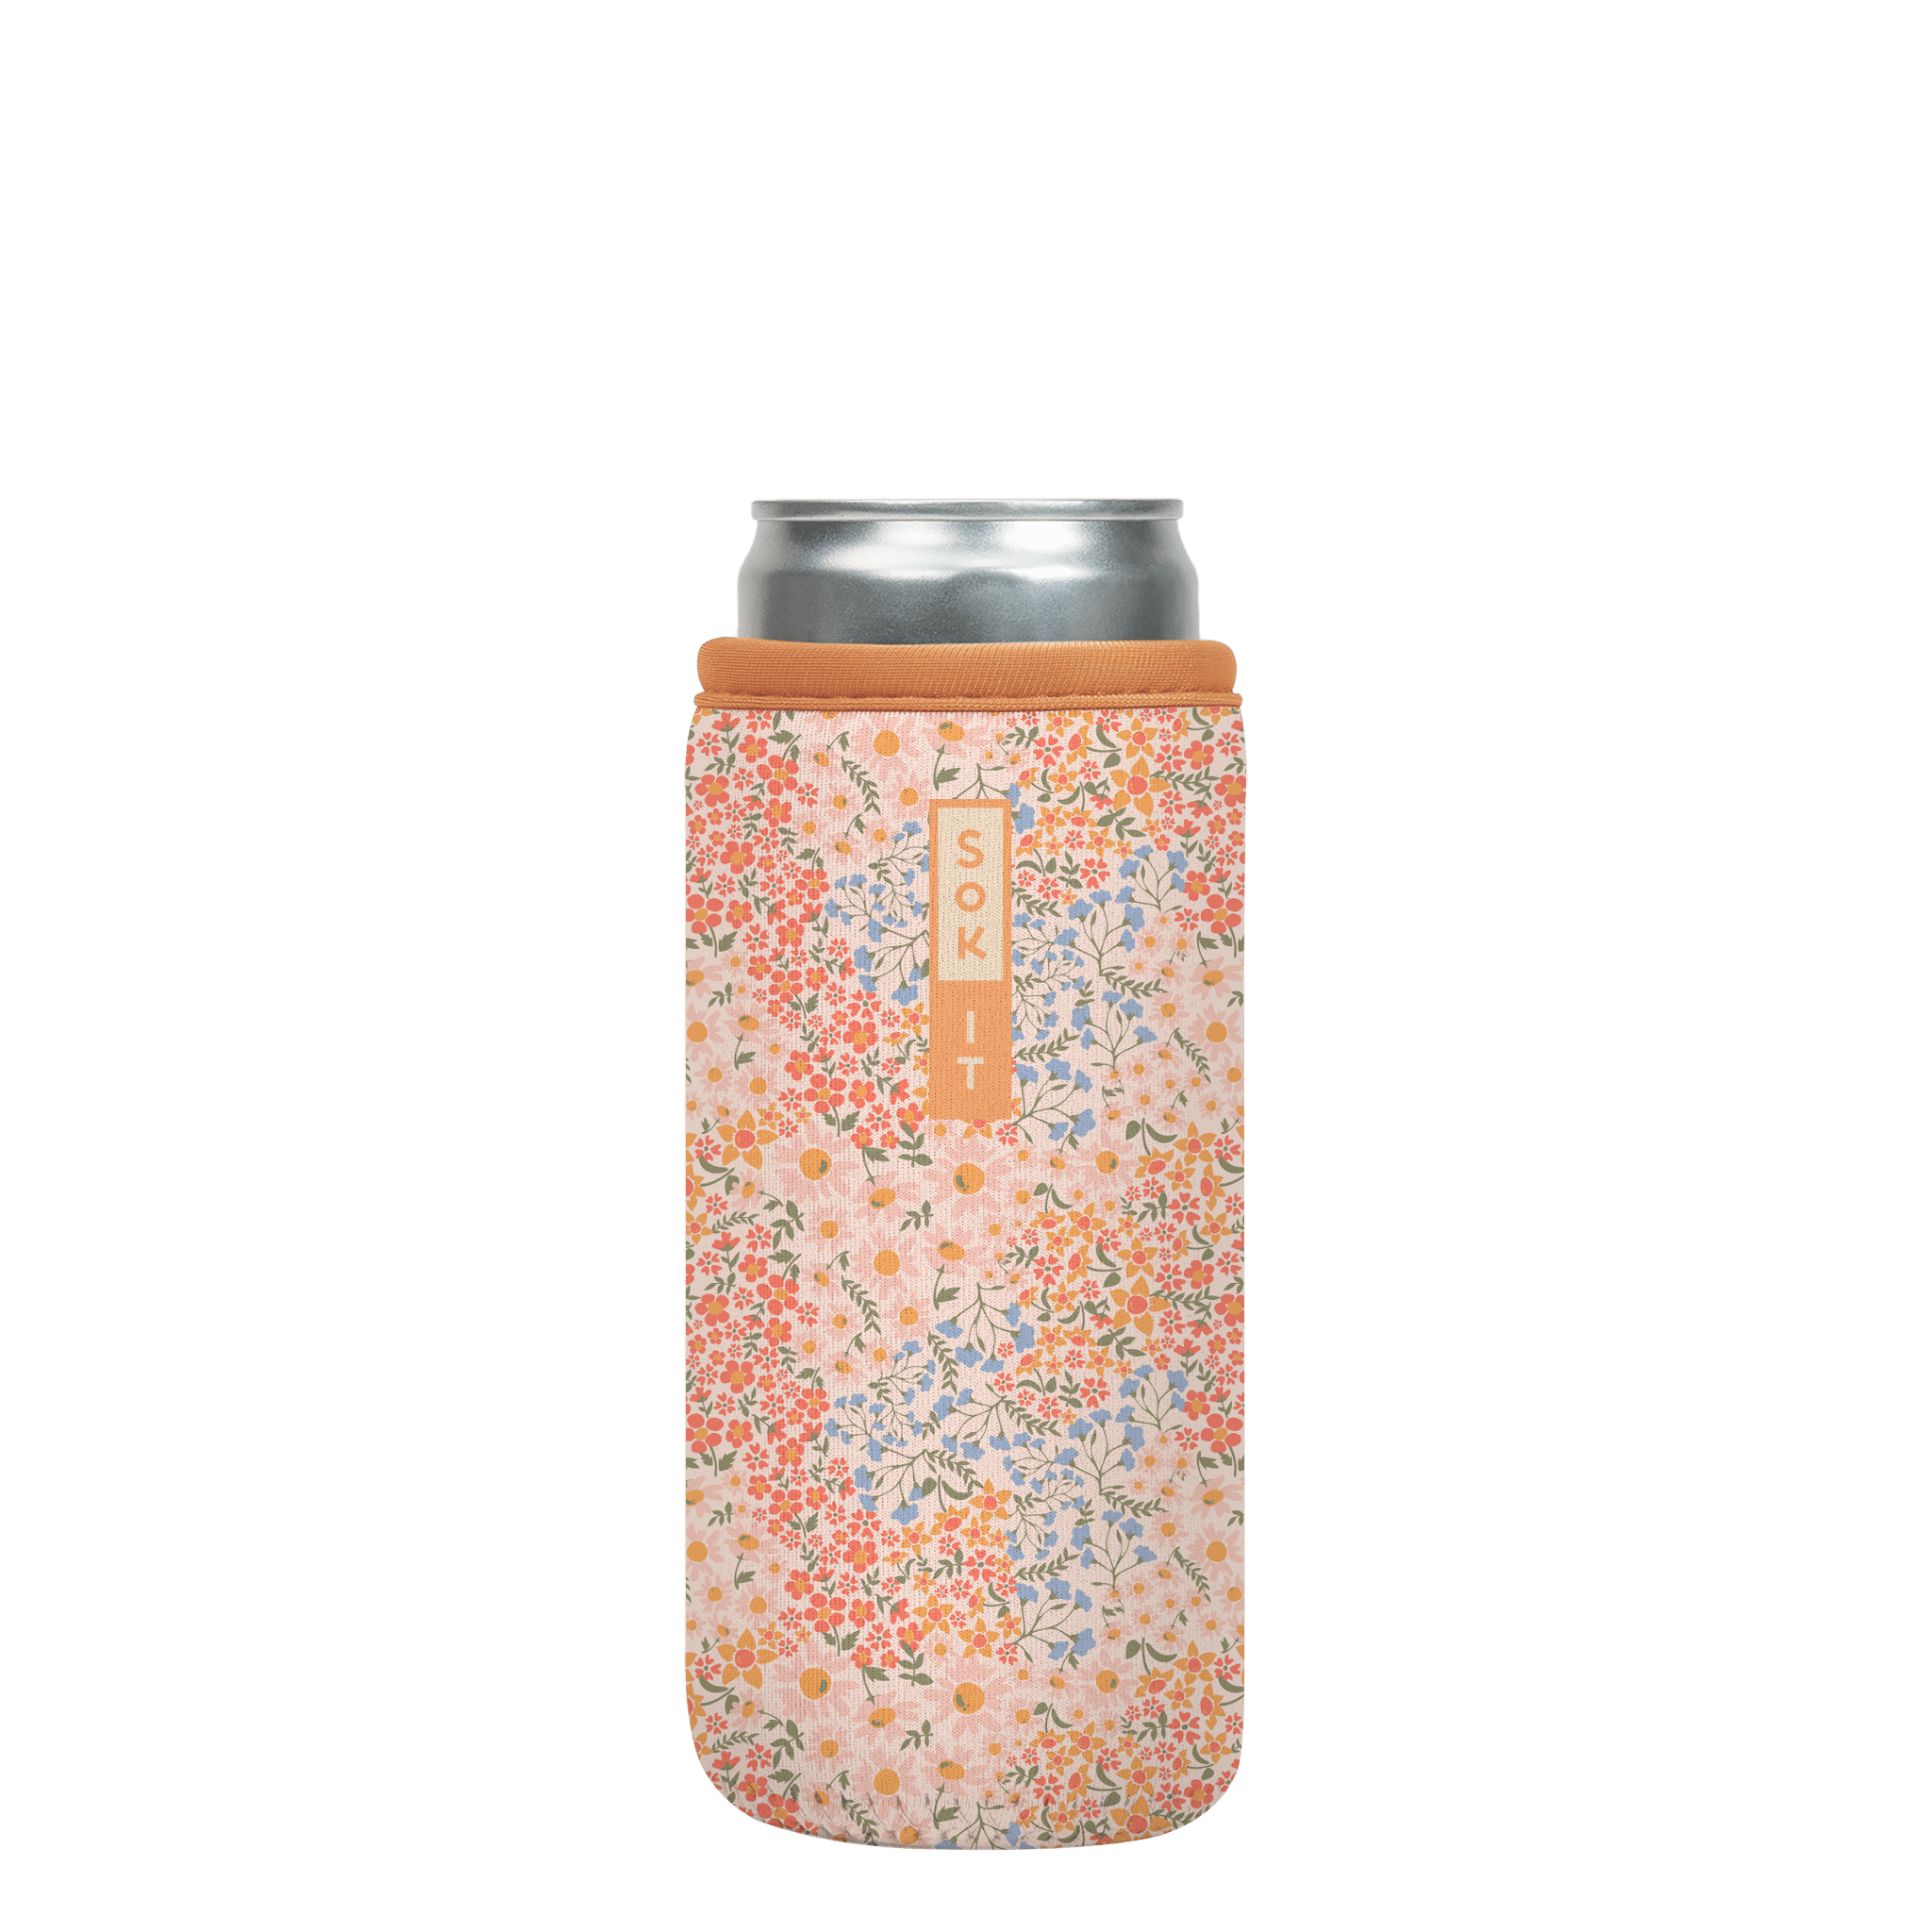 CanSok-Floral Dainty Florals 12oz Slim Can